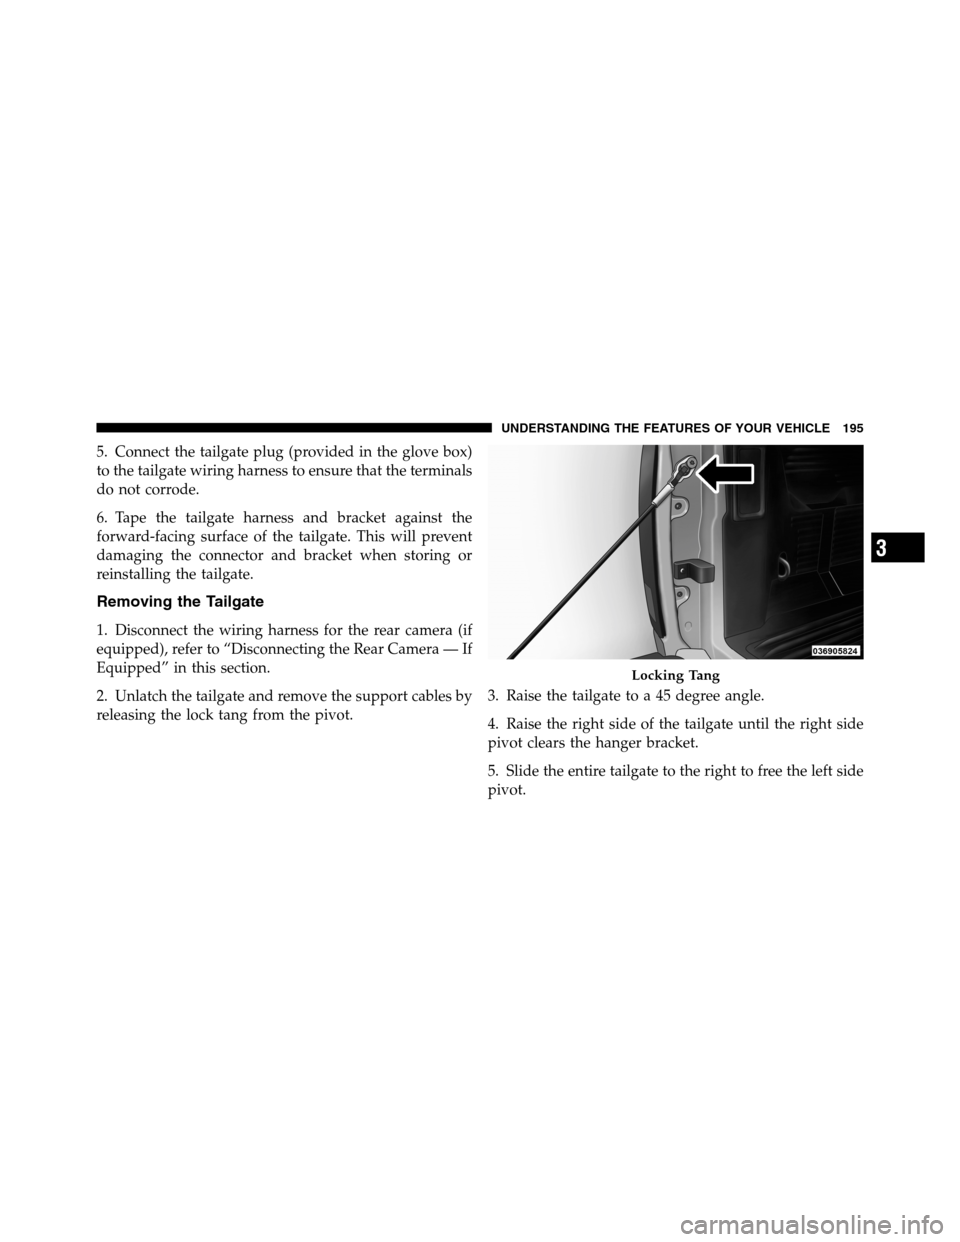 Ram 2500 2011  Owners Manual 5. Connect the tailgate plug (provided in the glove box)
to the tailgate wiring harness to ensure that the terminals
do not corrode.
6. Tape the tailgate harness and bracket against the
forward-facing